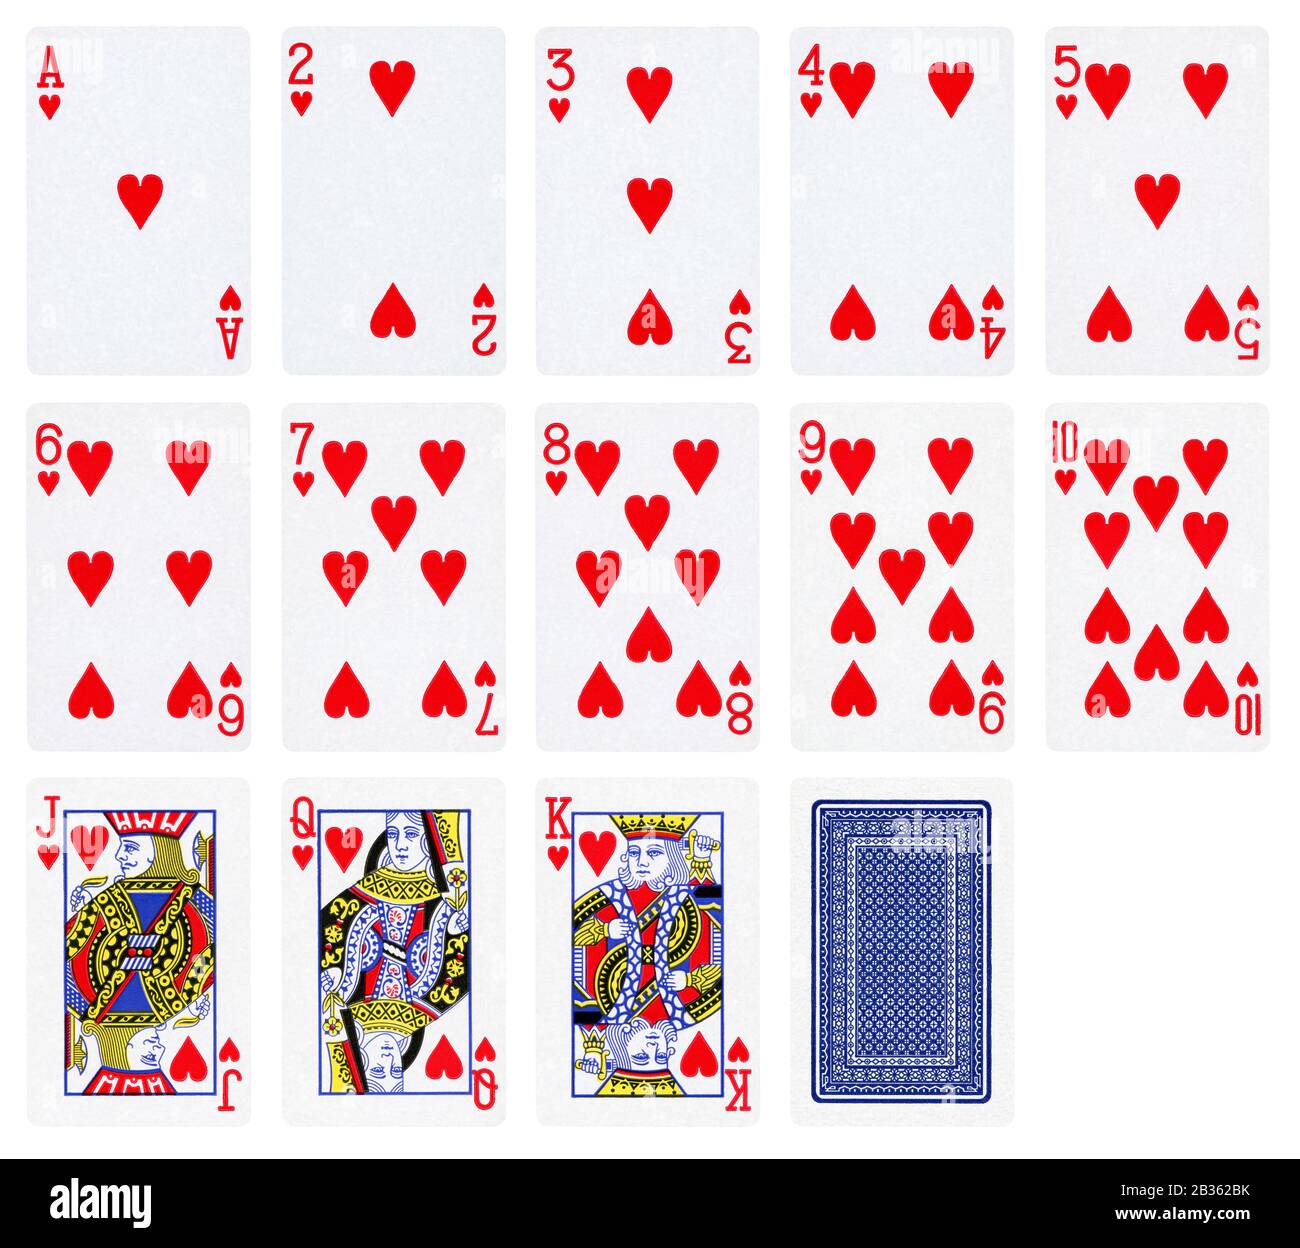 Playing cards of Hearts suit isolated on white background - High quality. Stock Photo